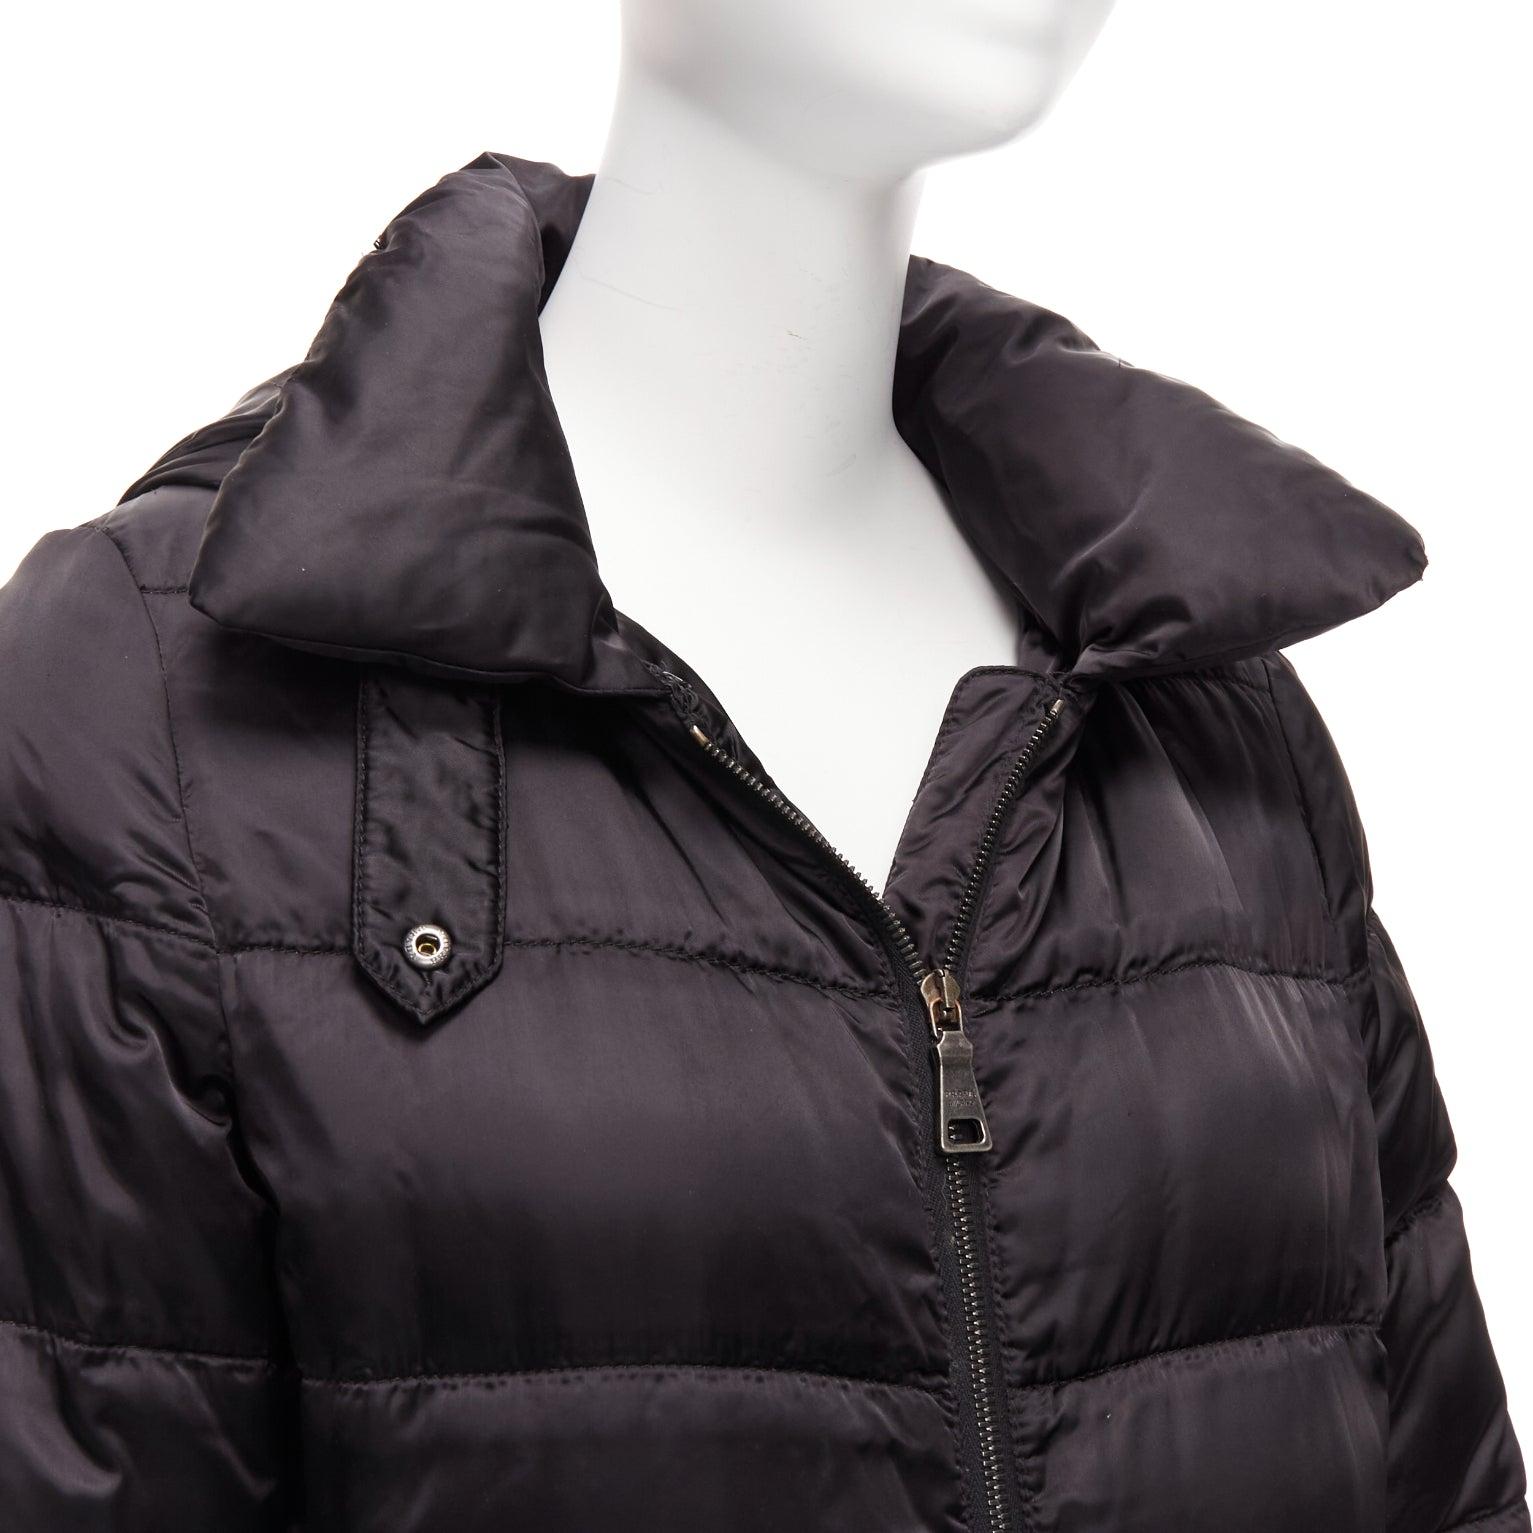 PRADA 2010 black shiny nylon hooded quilted long sleeve puffer coat IT42 M
Reference: CNPG/A00070
Brand: Prada
Designer: Miuccia Prada
Collection: 2010
Material: Nylon
Color: Black
Pattern: Solid
Closure: Zip
Lining: Black Fabric
Made in: